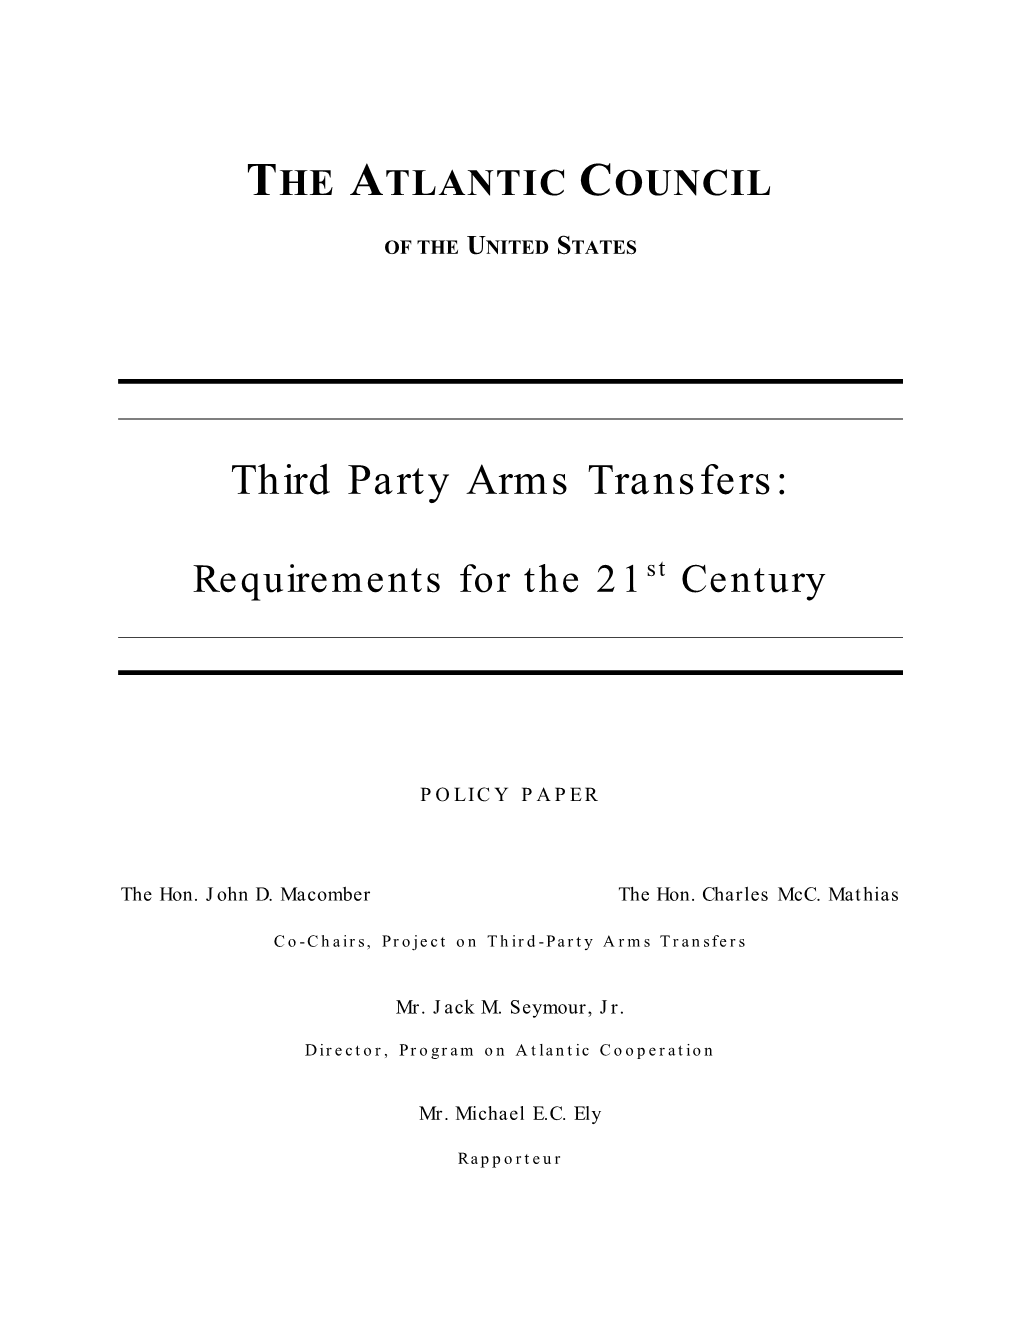 Third Party Arms Transfers